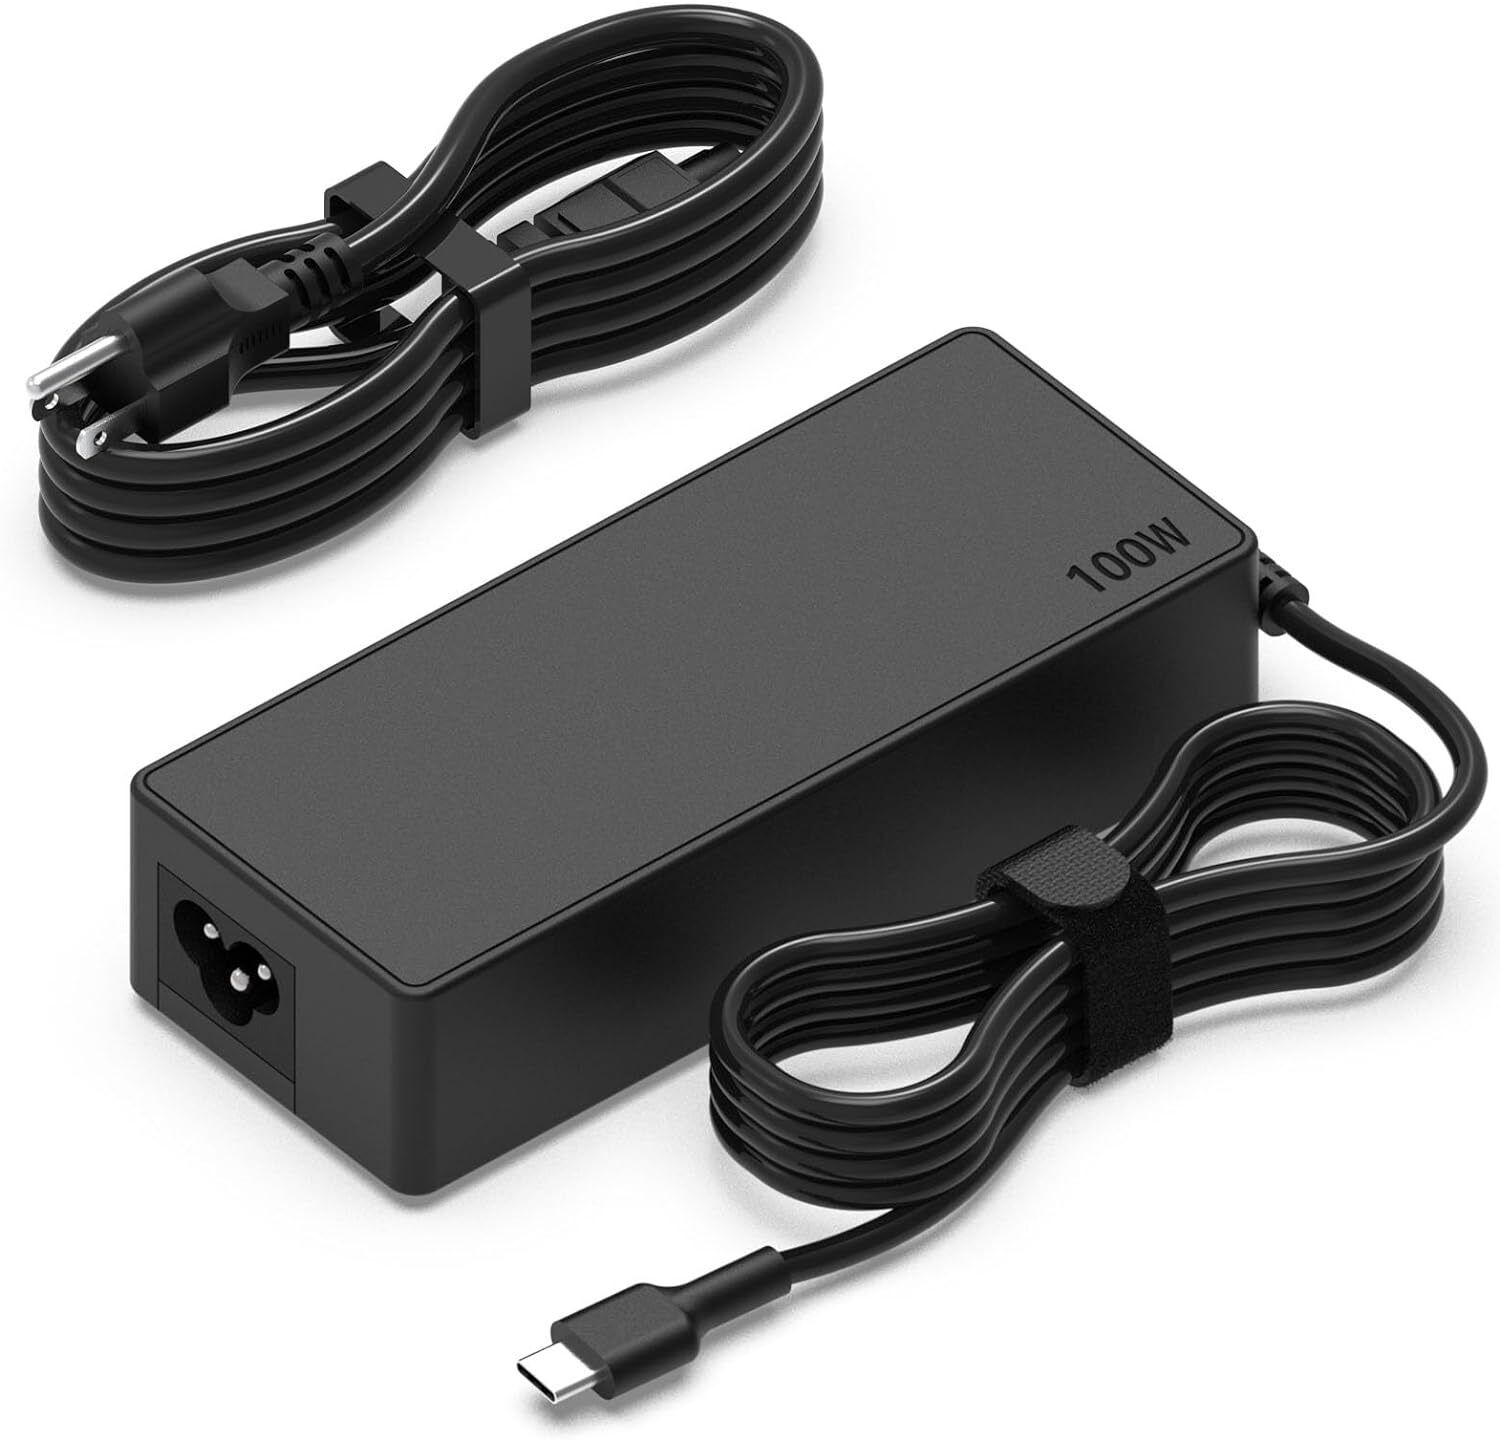 Genuine 100W Type-C USB-C Laptop Charger for Lenovo, ThinkPad, HP, Asus, MacBook